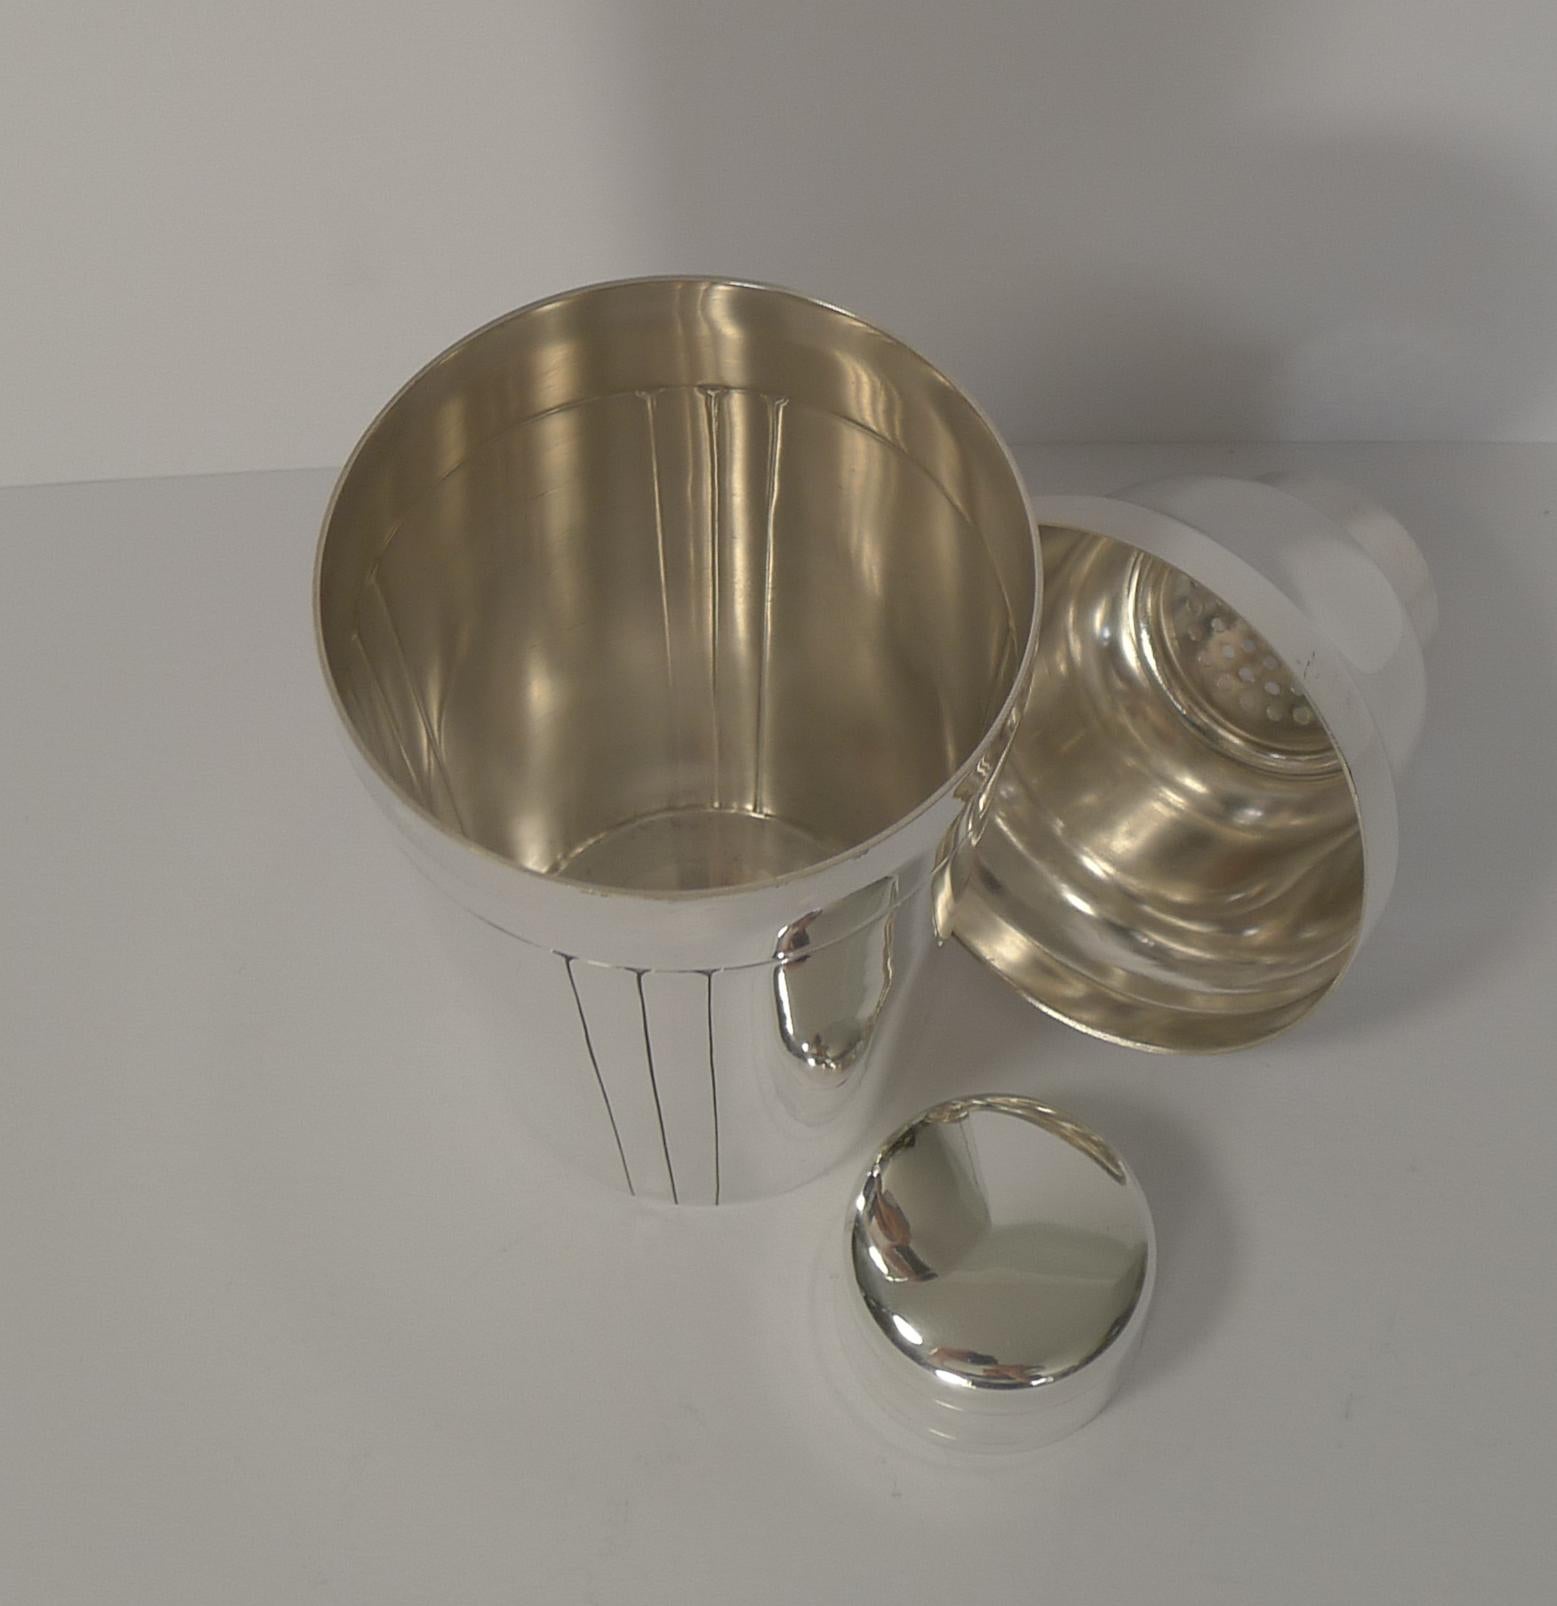 French Art Deco Silver Plated Cocktail Shaker circa 1930 by Orbrille Paris 5